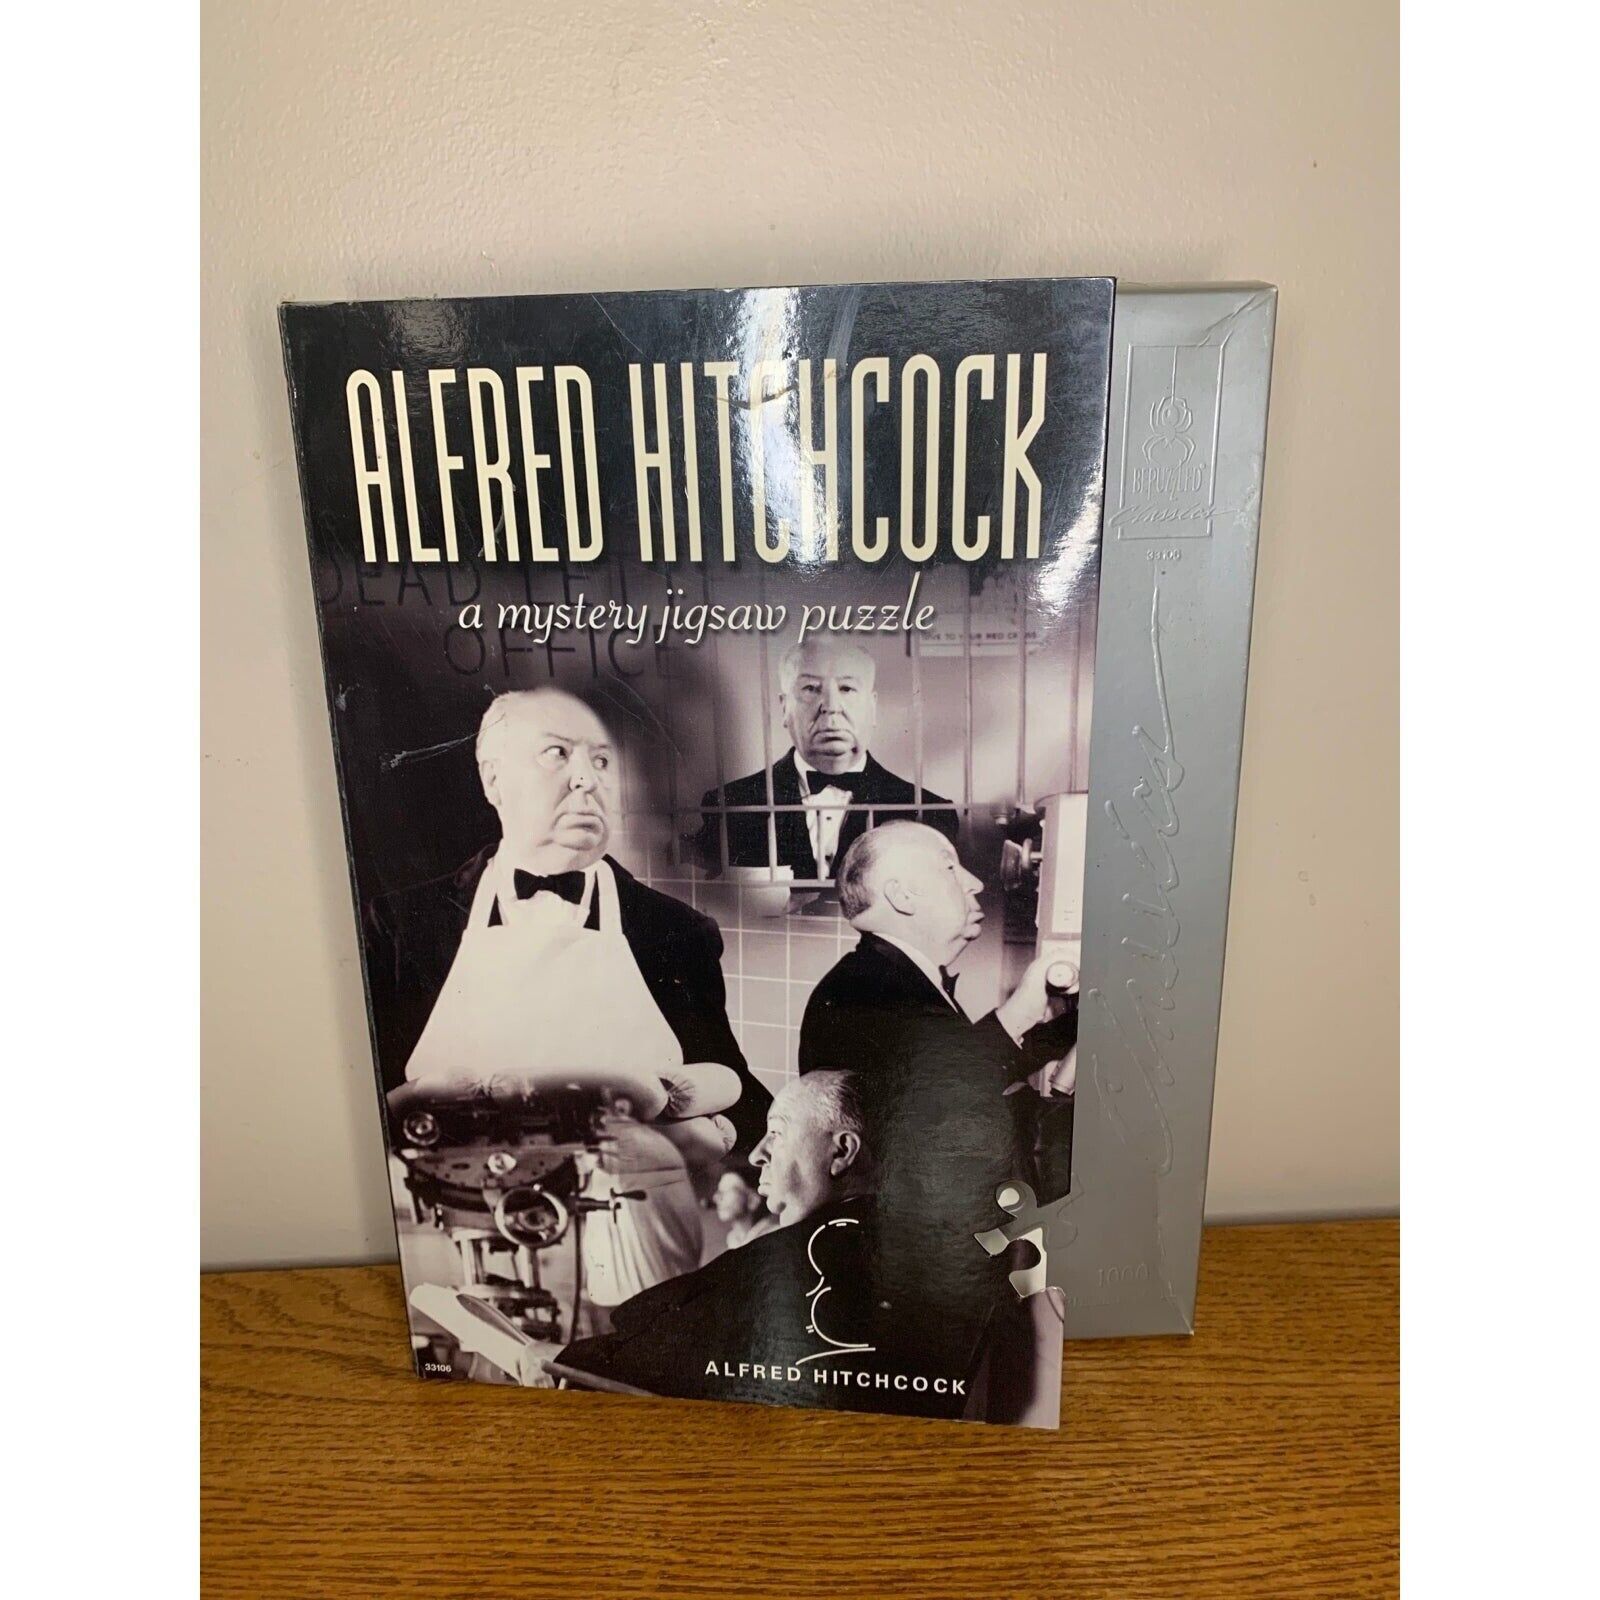 Alfred Hitchcock Mystery Jigsaw Puzzle 1000 Piece BePuzzled Games new nwt - $23.75